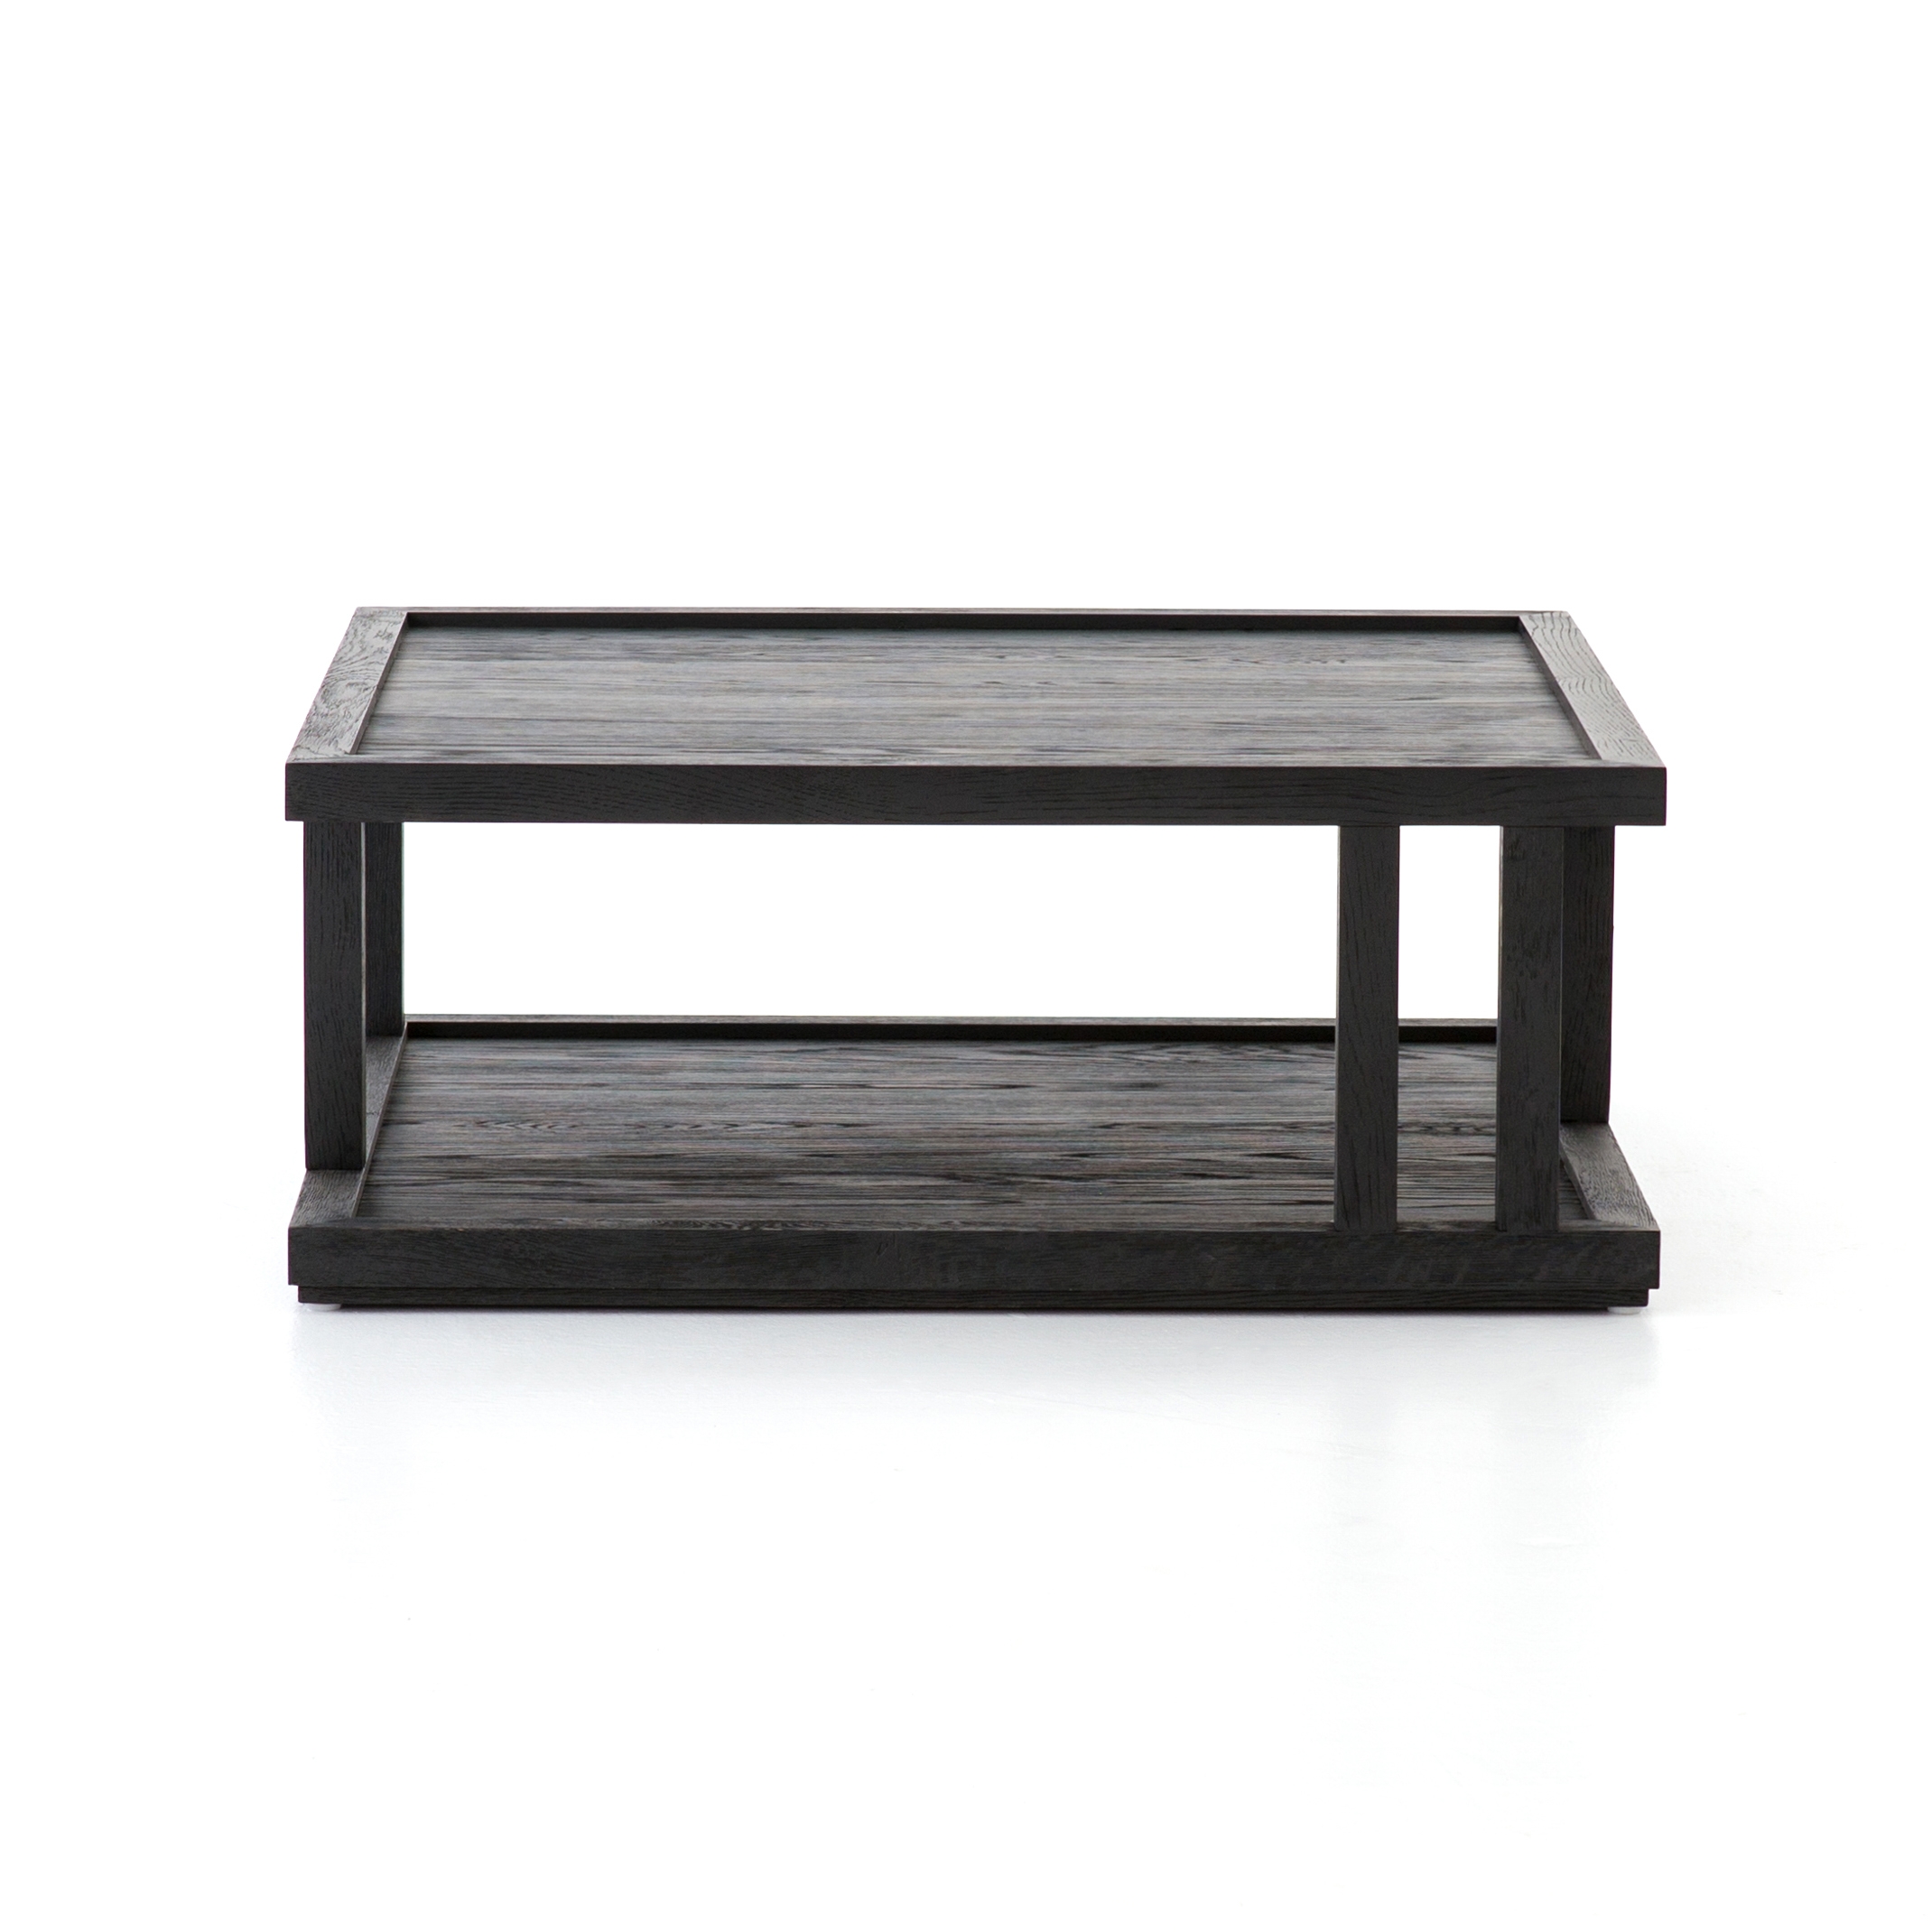 Charley Coffee Table-Drifted Black - Image 4